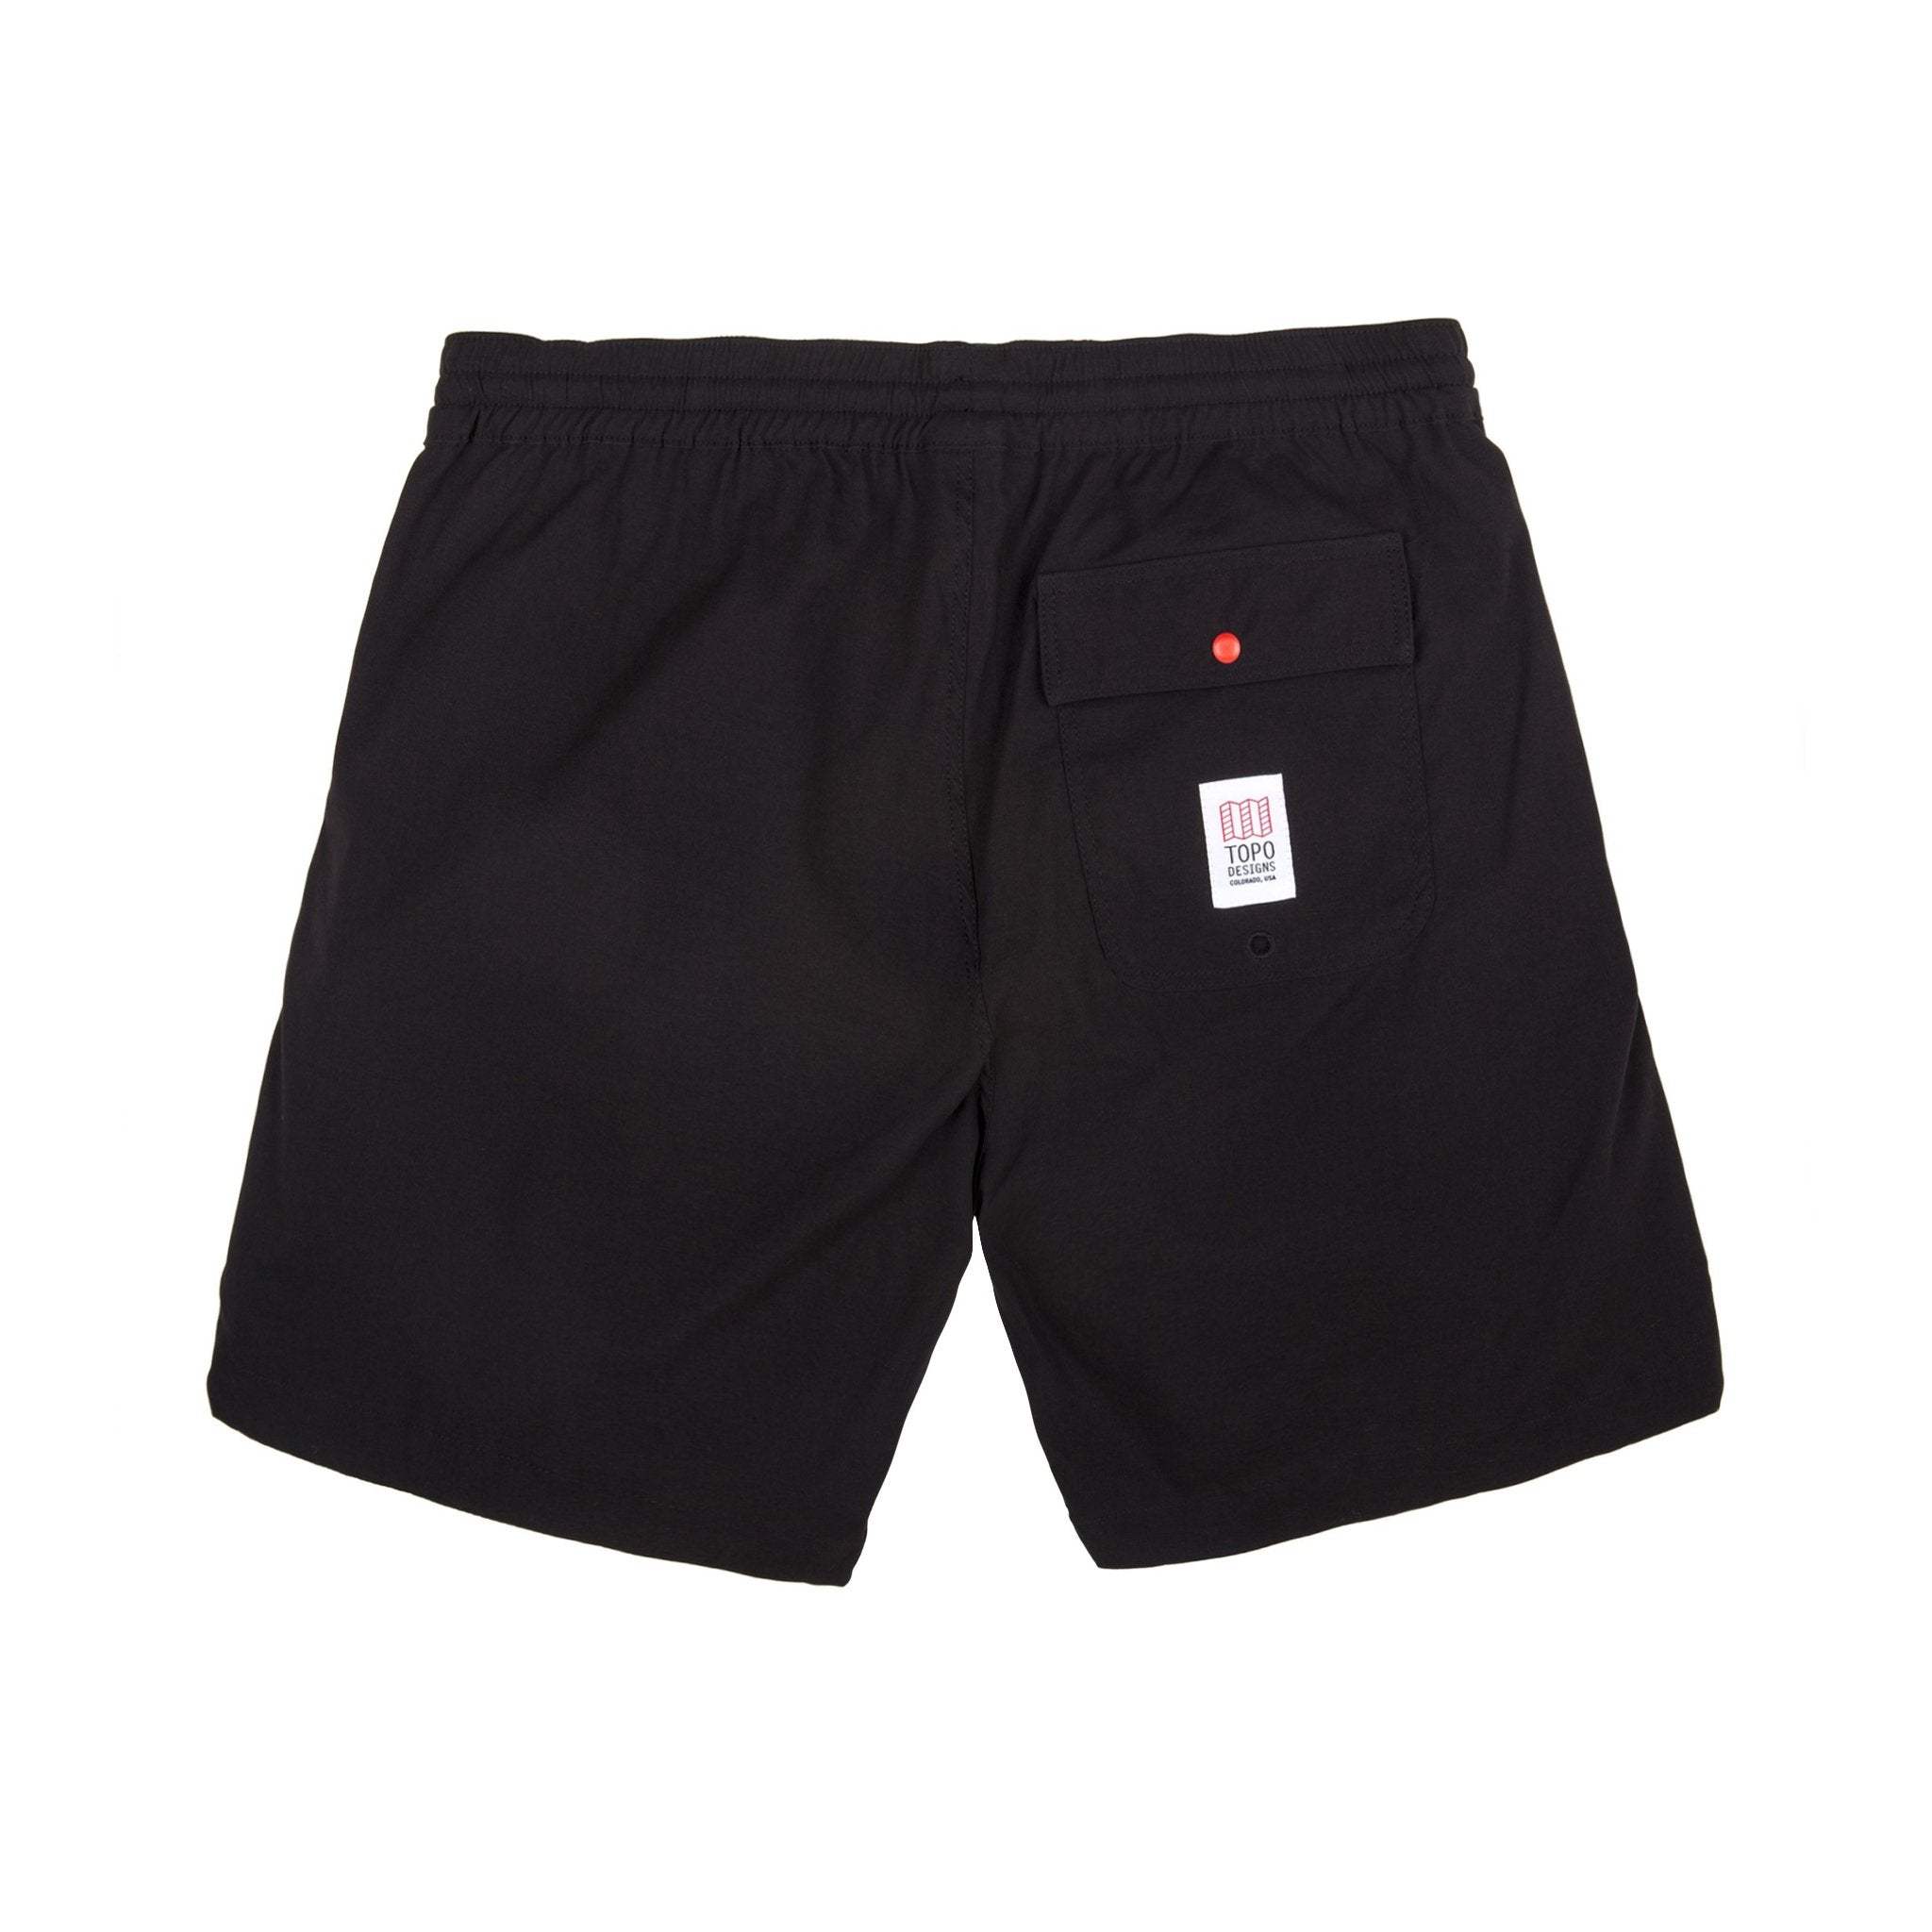 Back of Topo Designs Men's Global lightweight quick dry travel Shorts in Black showing snap pocket.